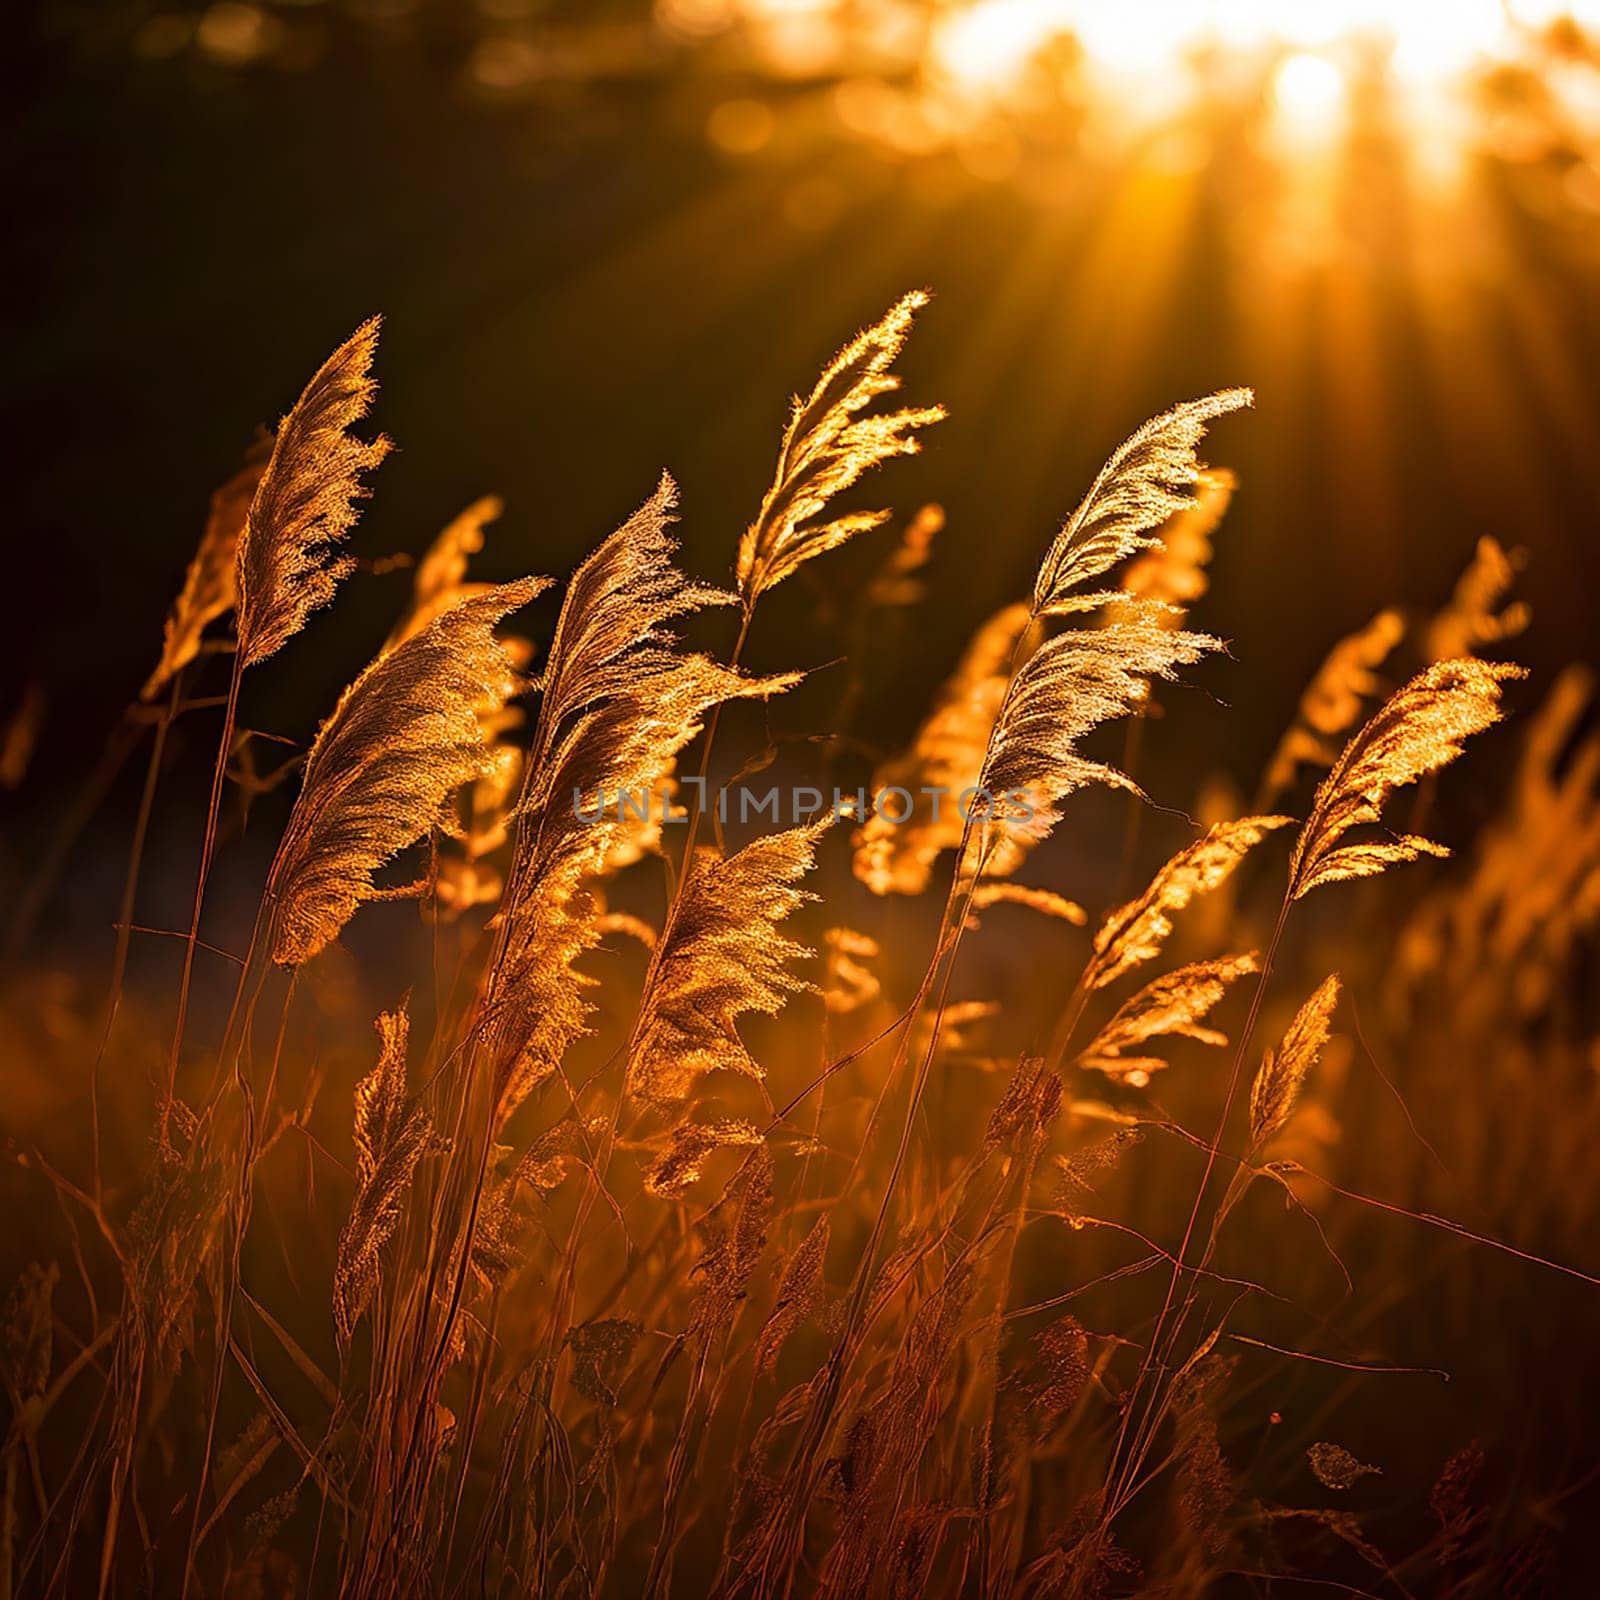 Whispers of Nature: Warm Sunlight and Blowing Wildgrass in Harmony by Petrichor